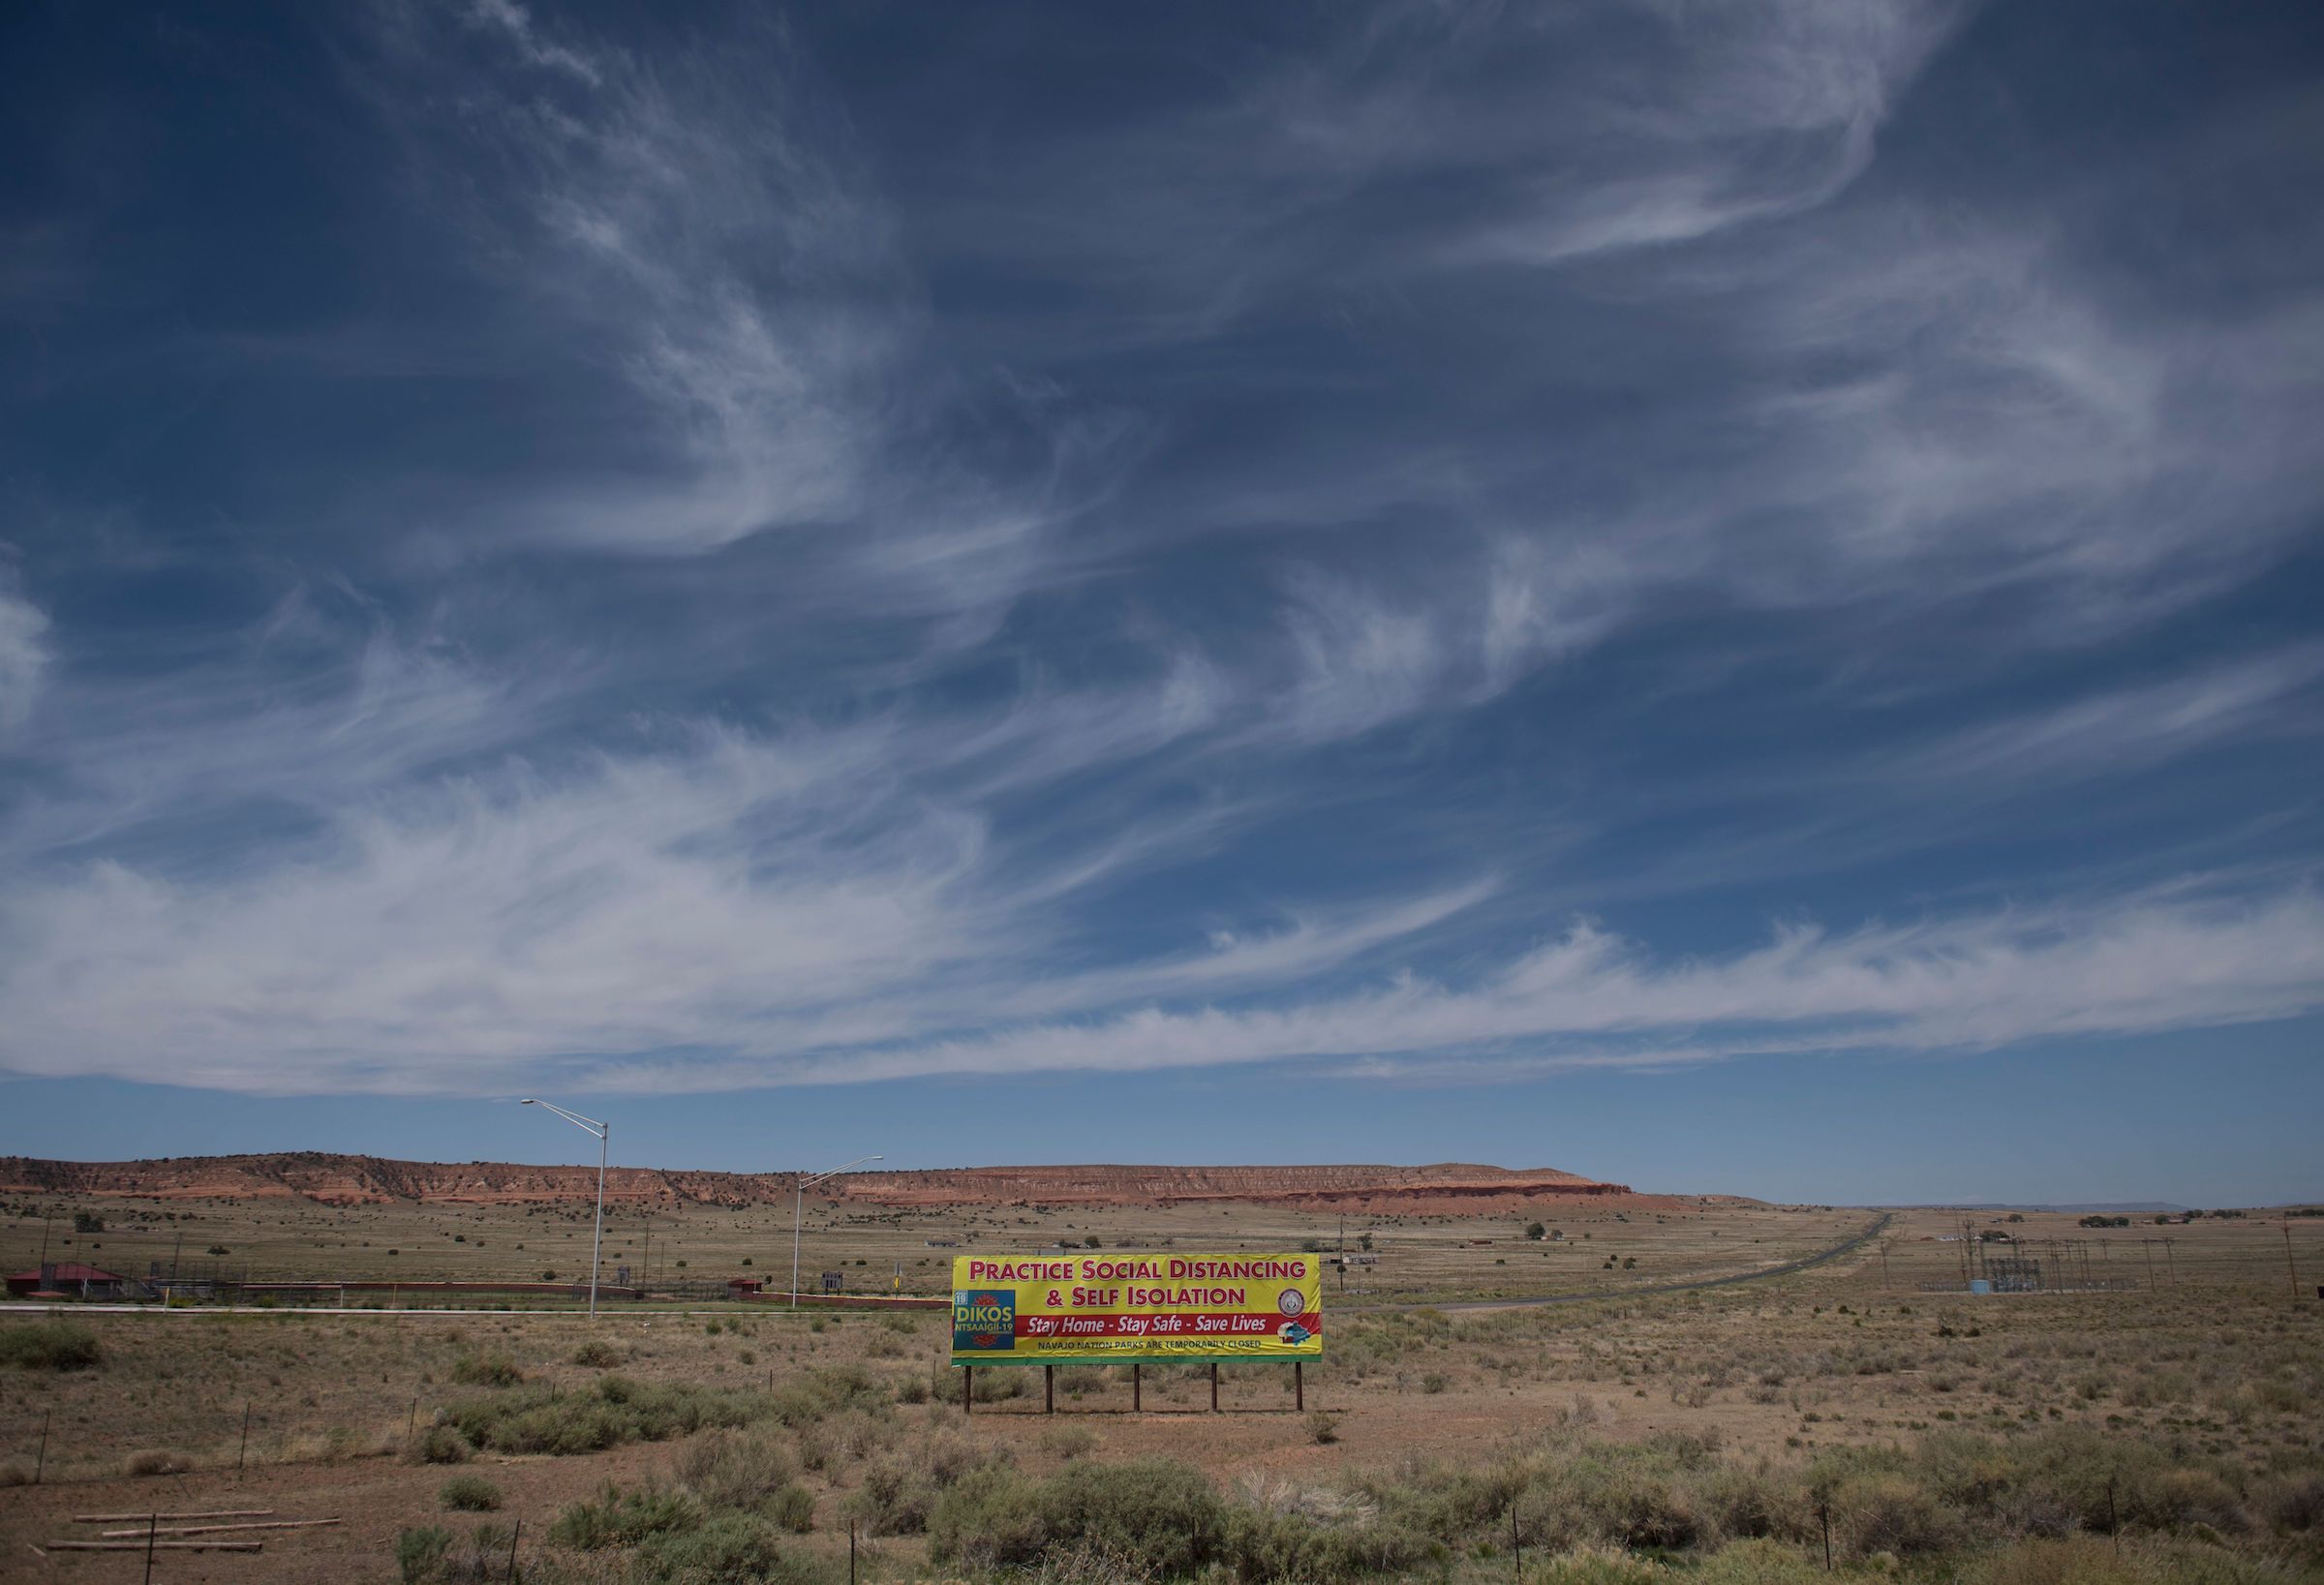 A sign promoting social distancing sits near the Navajo Nation town of Chinle during the 57 hour curfew imposed to try to stop the spread of the Covid-19 virus through the Navajo Nation, in Arizona on May 23, 2020. (Mark Ralston—AFP/Getty Images)